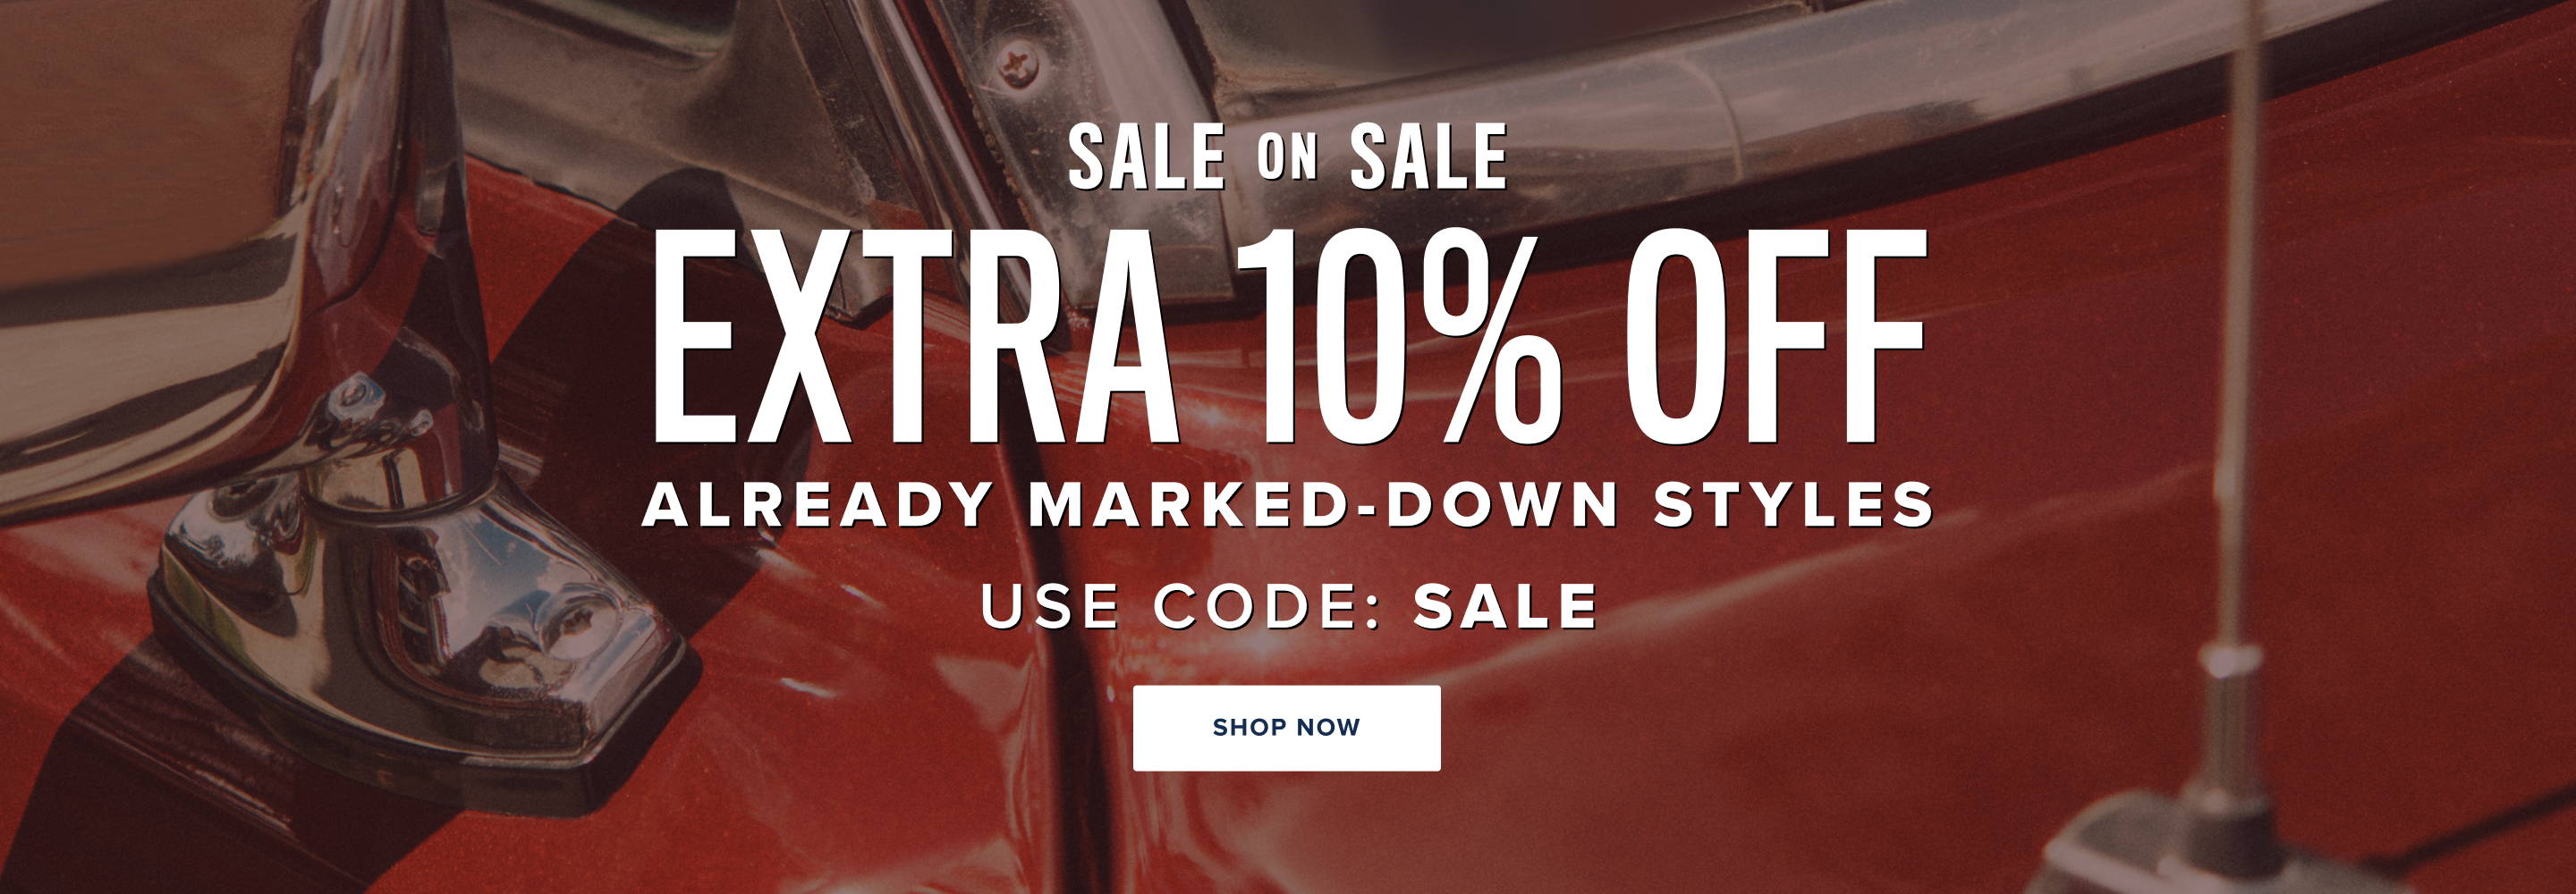 Sale on Sale. Extra 10% off already marked down styles. Use code: SALE 